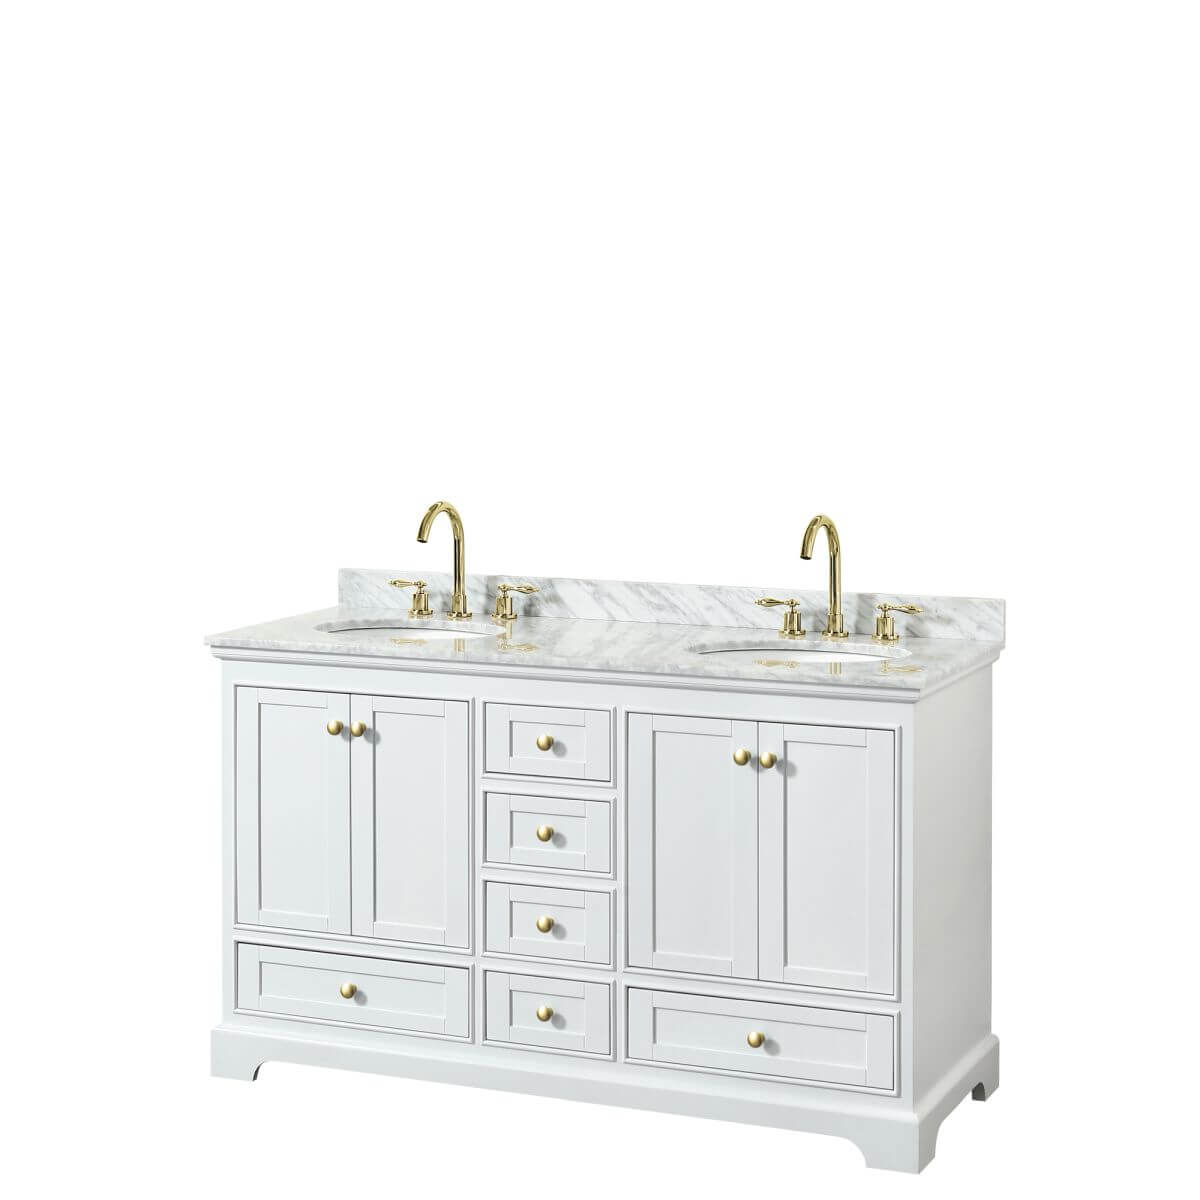 Wyndham Collection Deborah 60 inch Double Bathroom Vanity in White with White Carrara Marble Countertop, Undermount Oval Sinks, Brushed Gold Trim and No Mirrors - WCS202060DWGCMUNOMXX